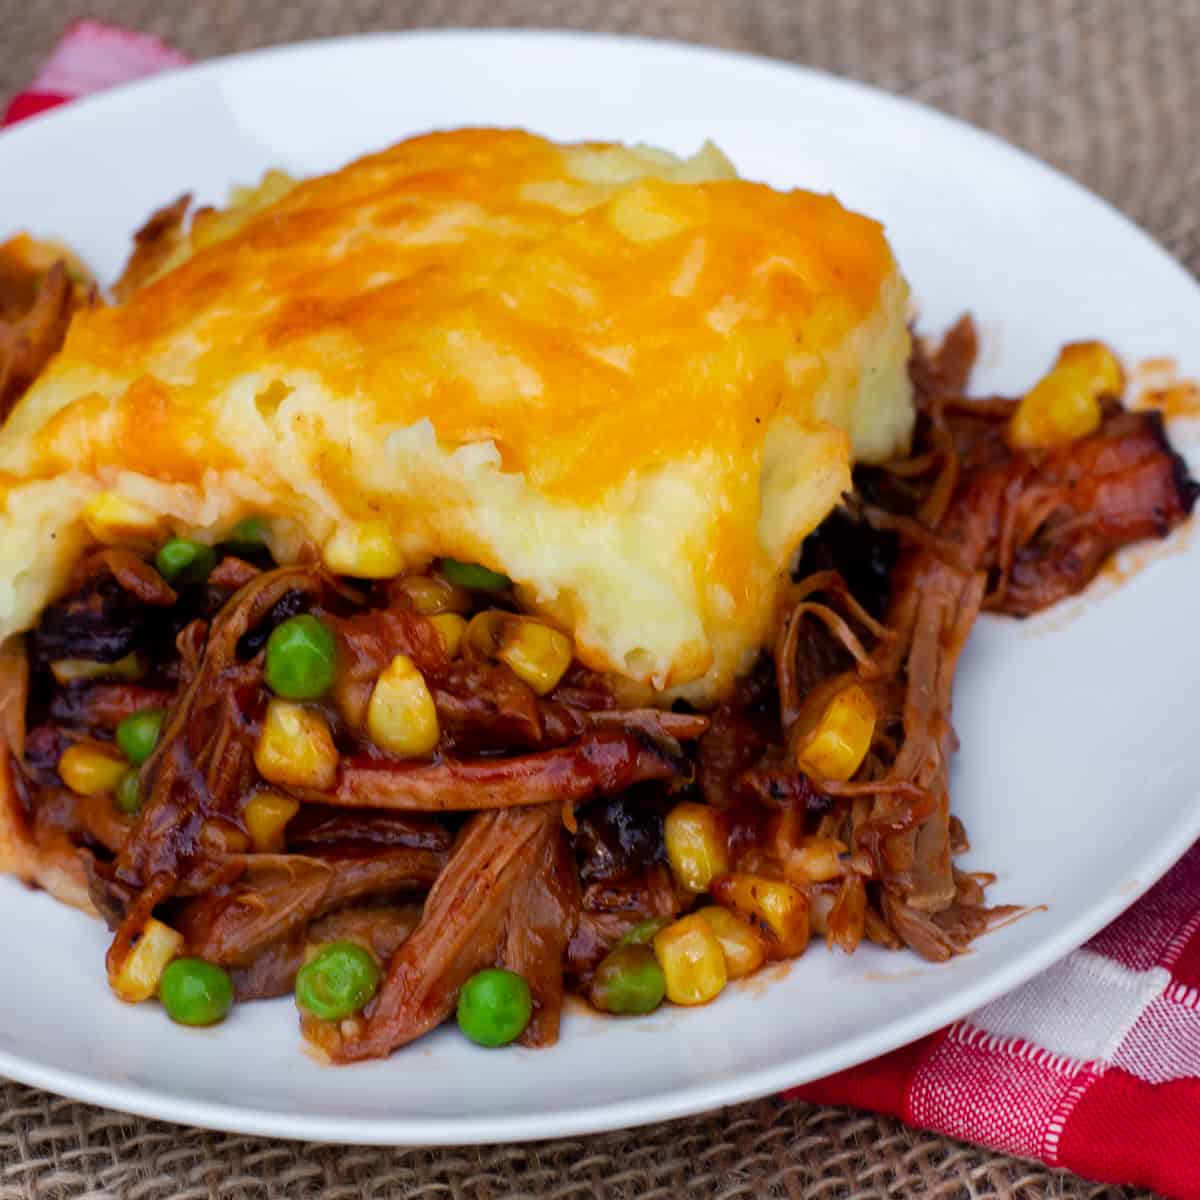 A close up picture of shepherd's pie.